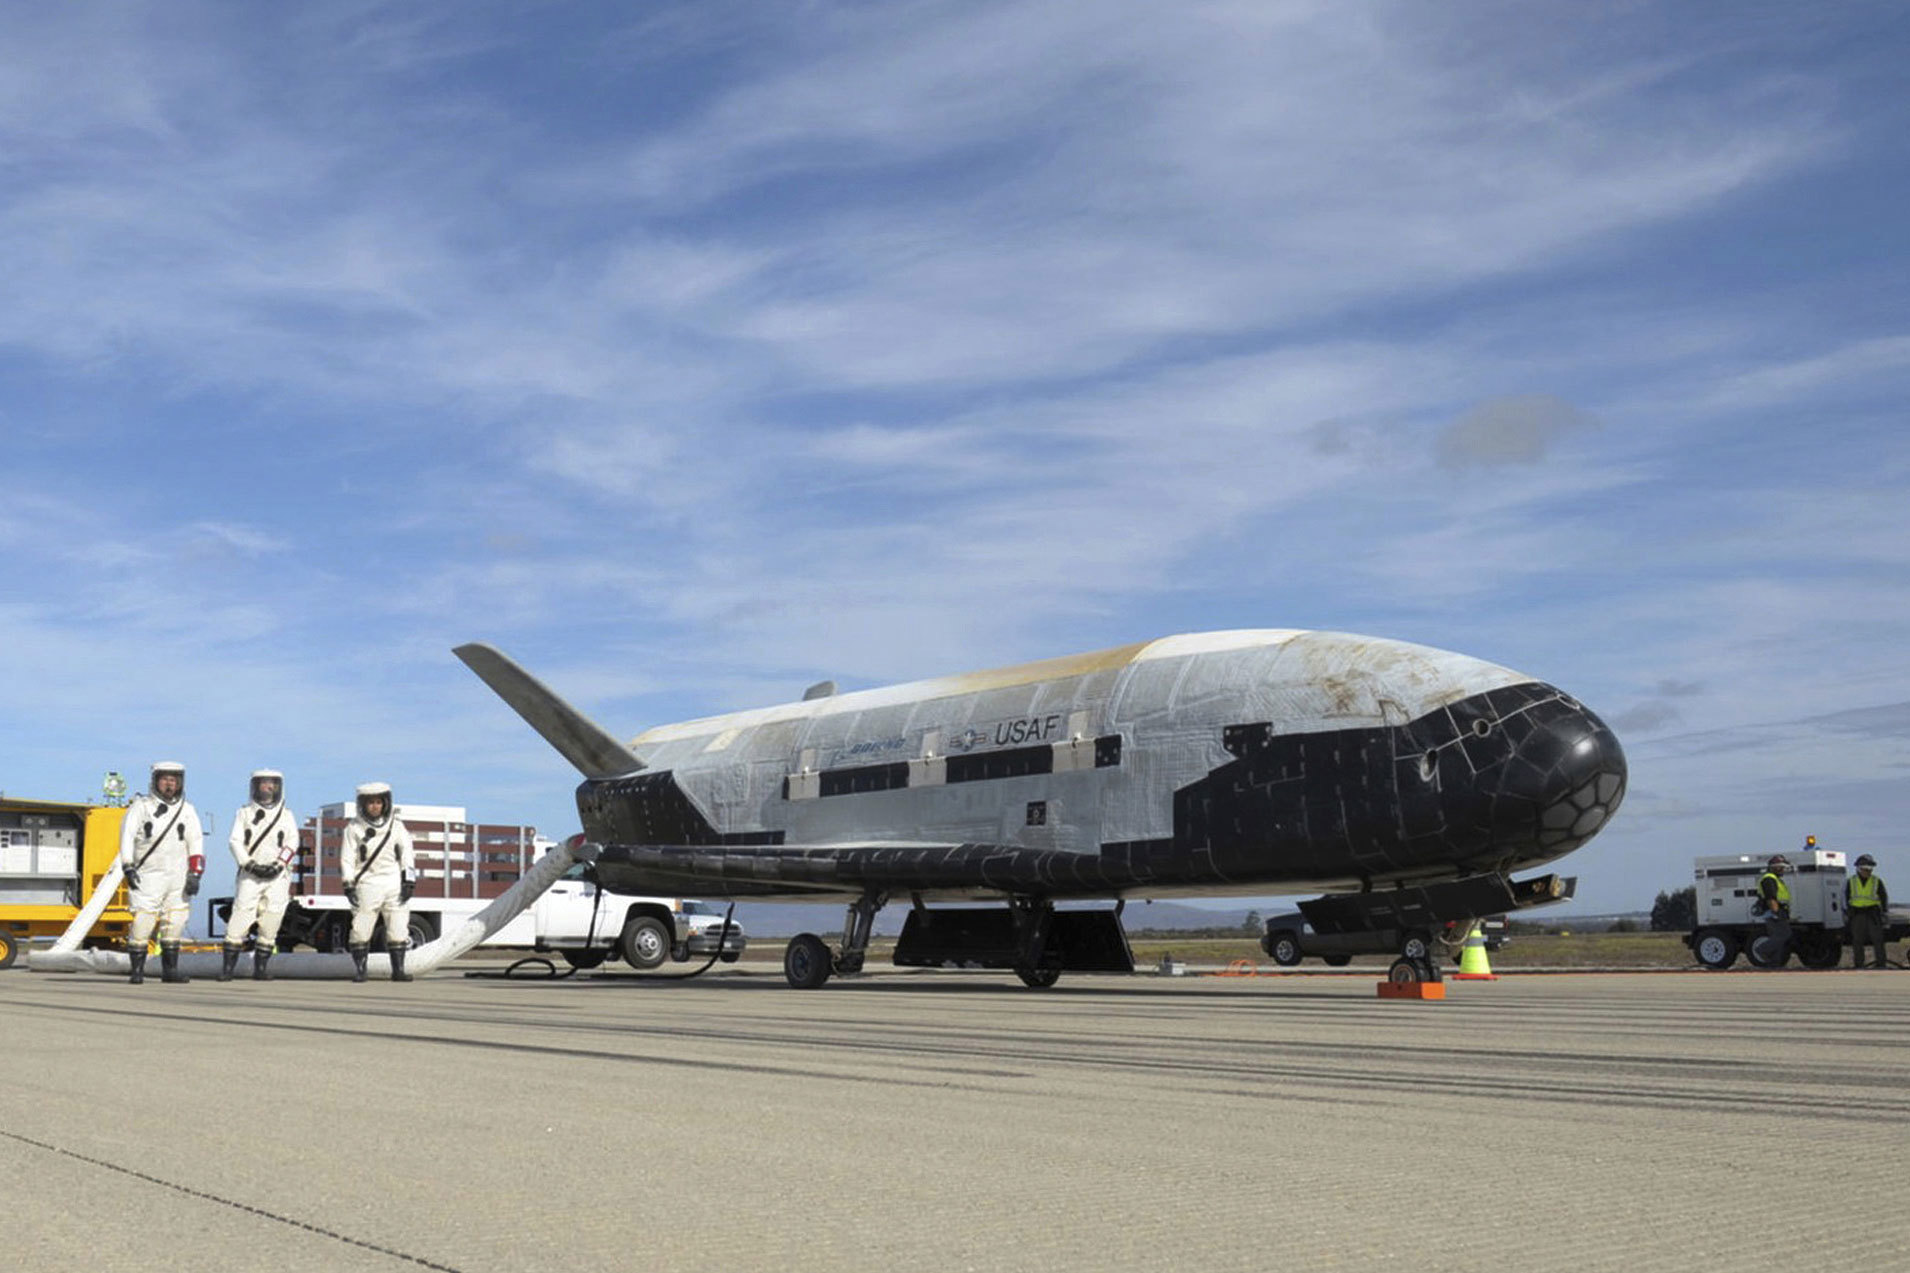 X-37B Orbital Test Vehicle at NASA's Kennedy Space Centre in Florida.